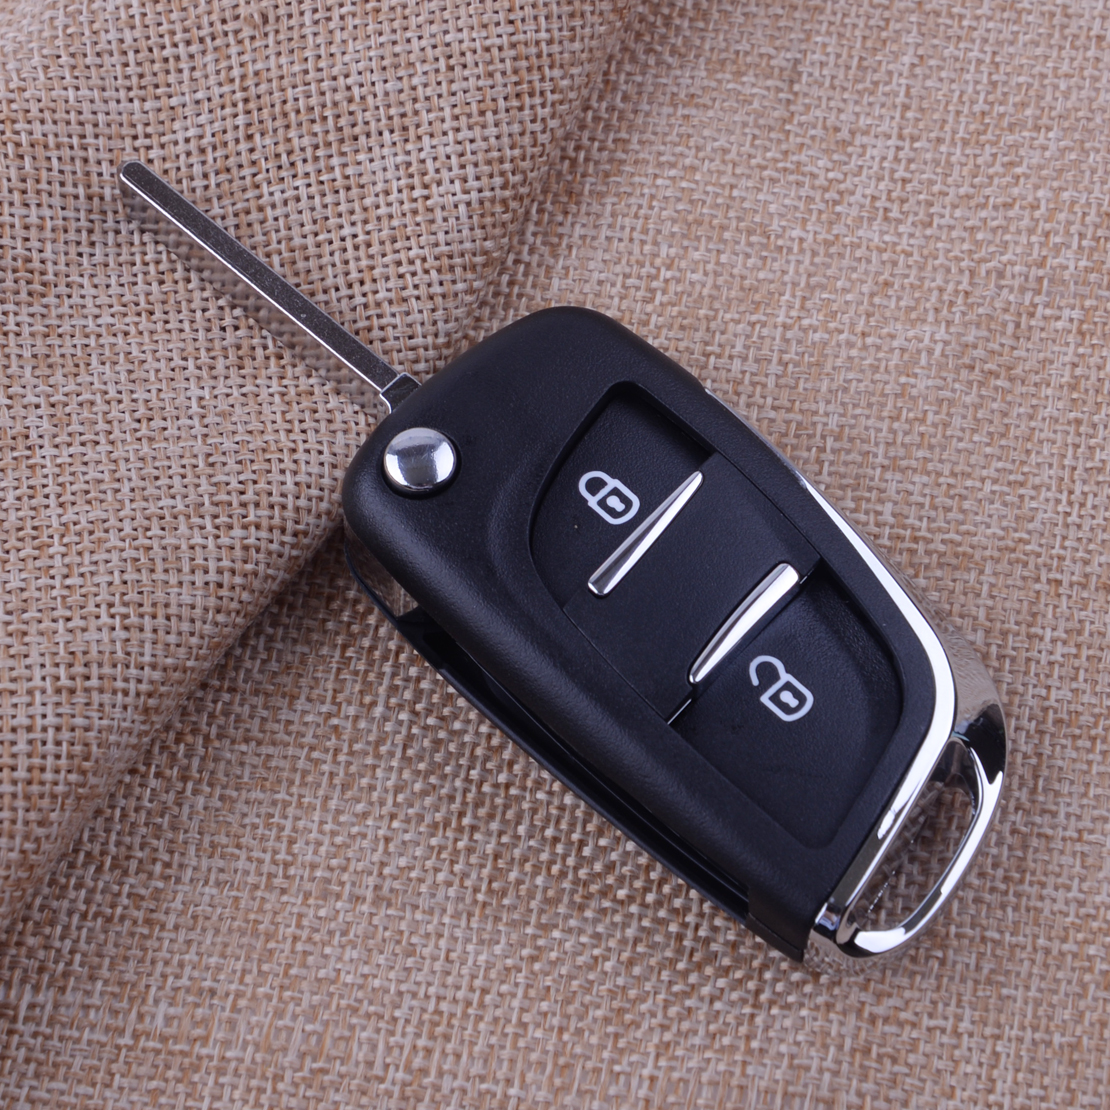 2 Buttons Key Bag Fit For Peugeot 207 307 308 407 Metal Key Fob Case Shell Cover